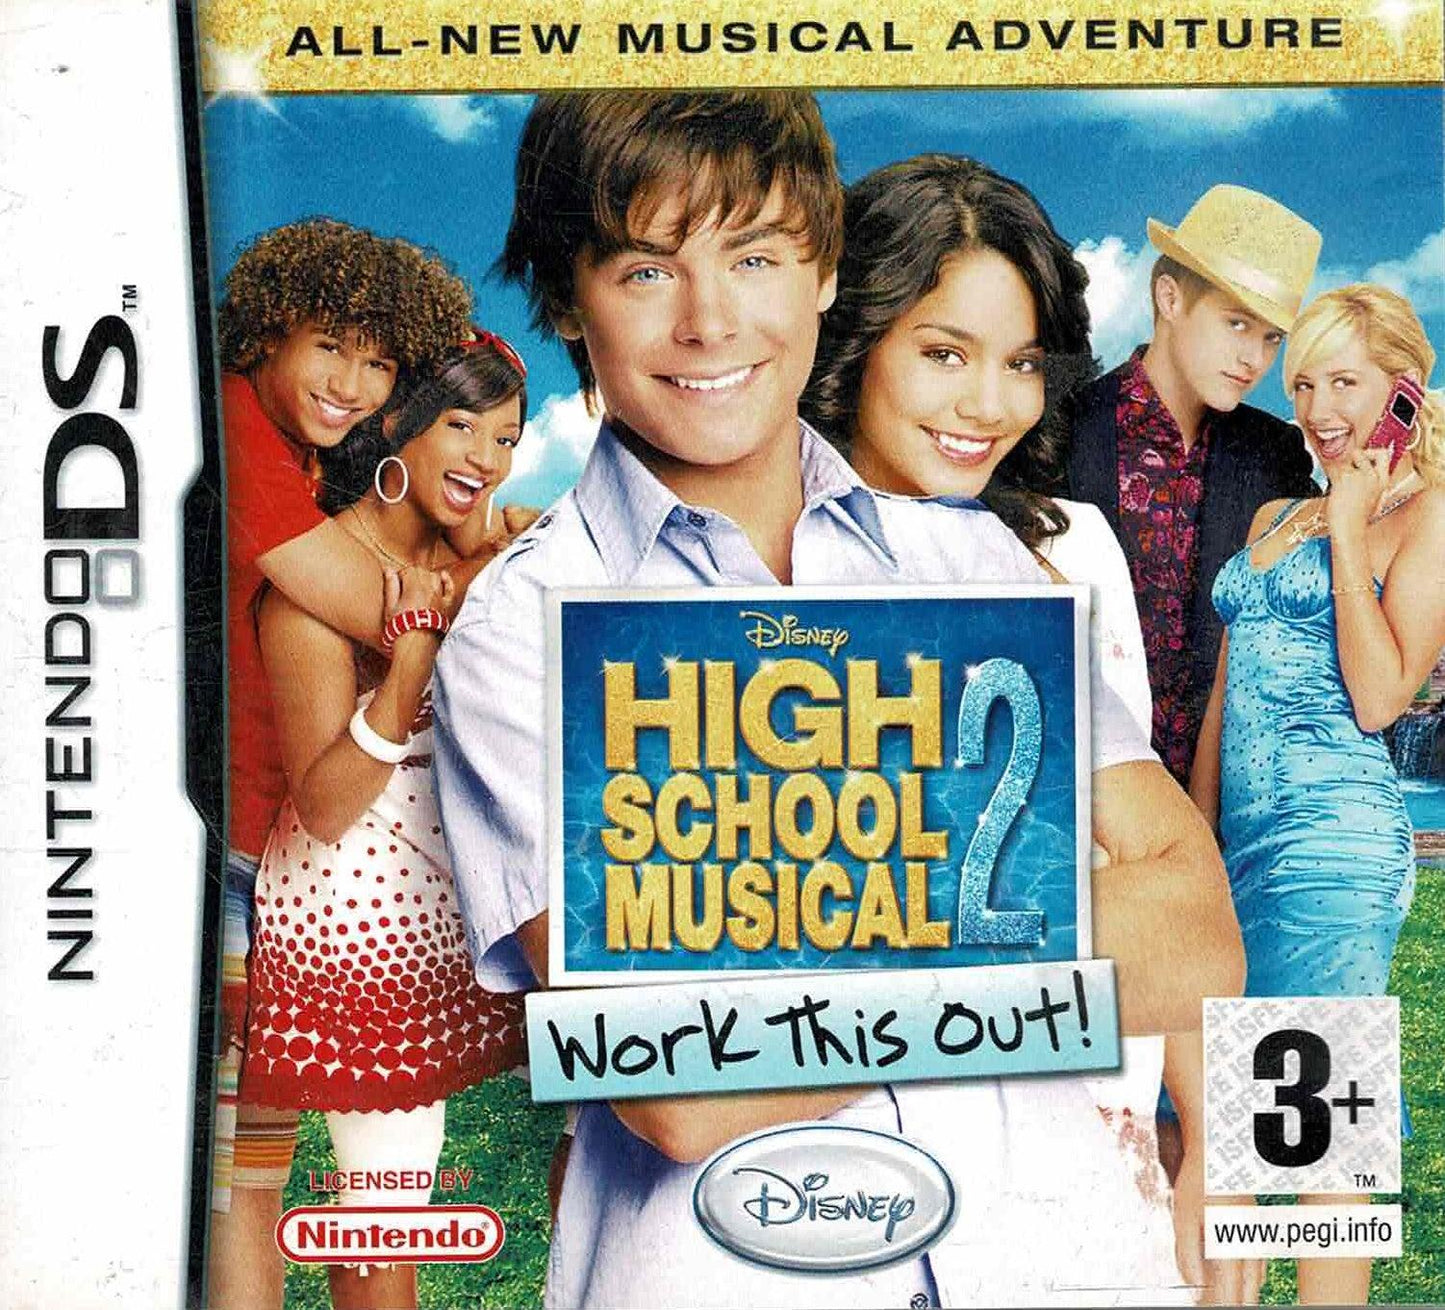 High School Musical 2: Work This out! - ZZGames.dk